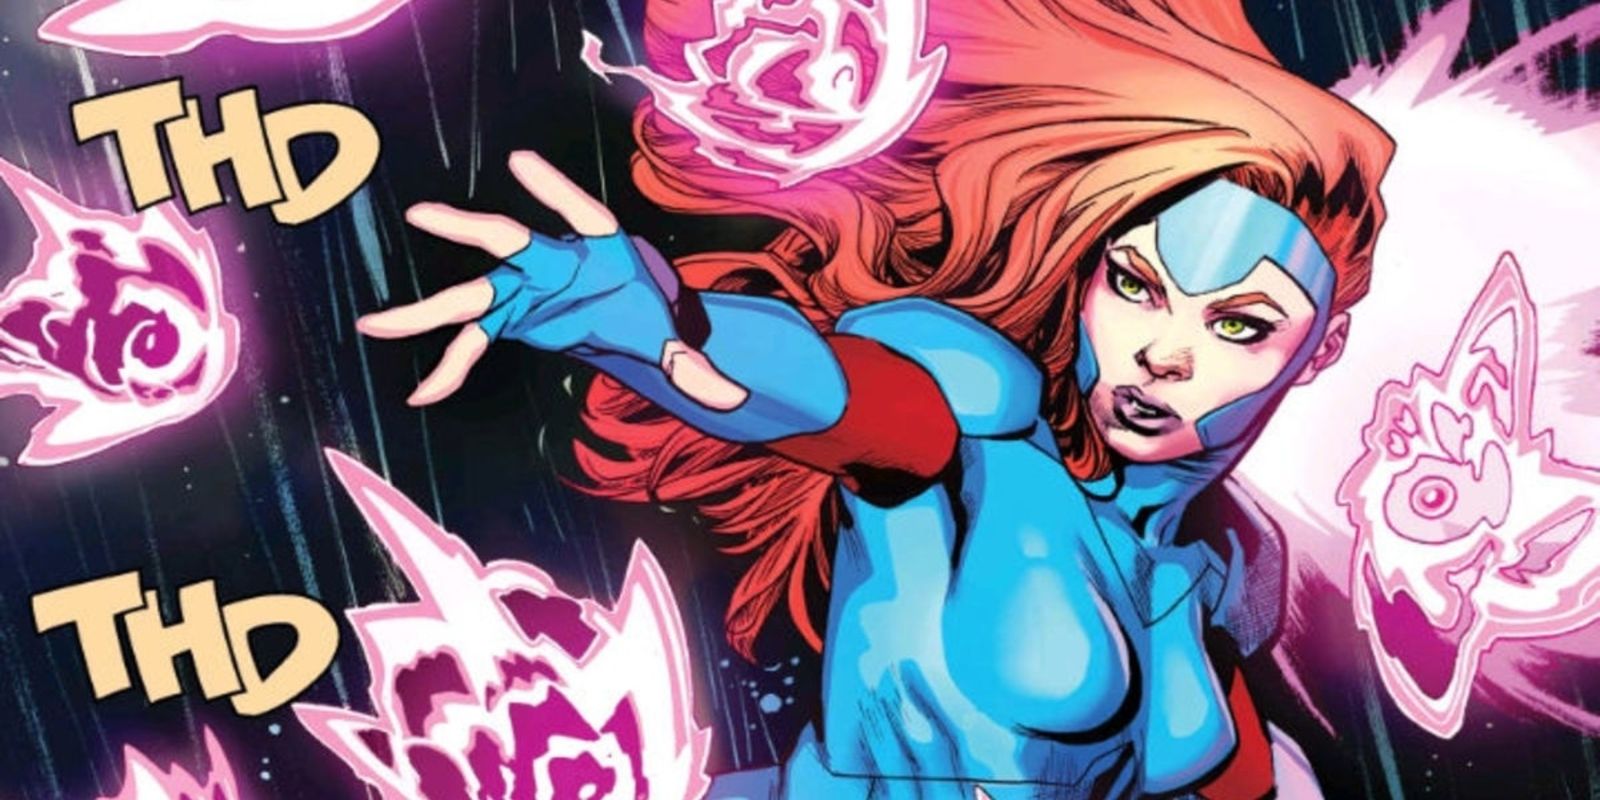 Jean Grey using her psychic powers in Marvel Comics.